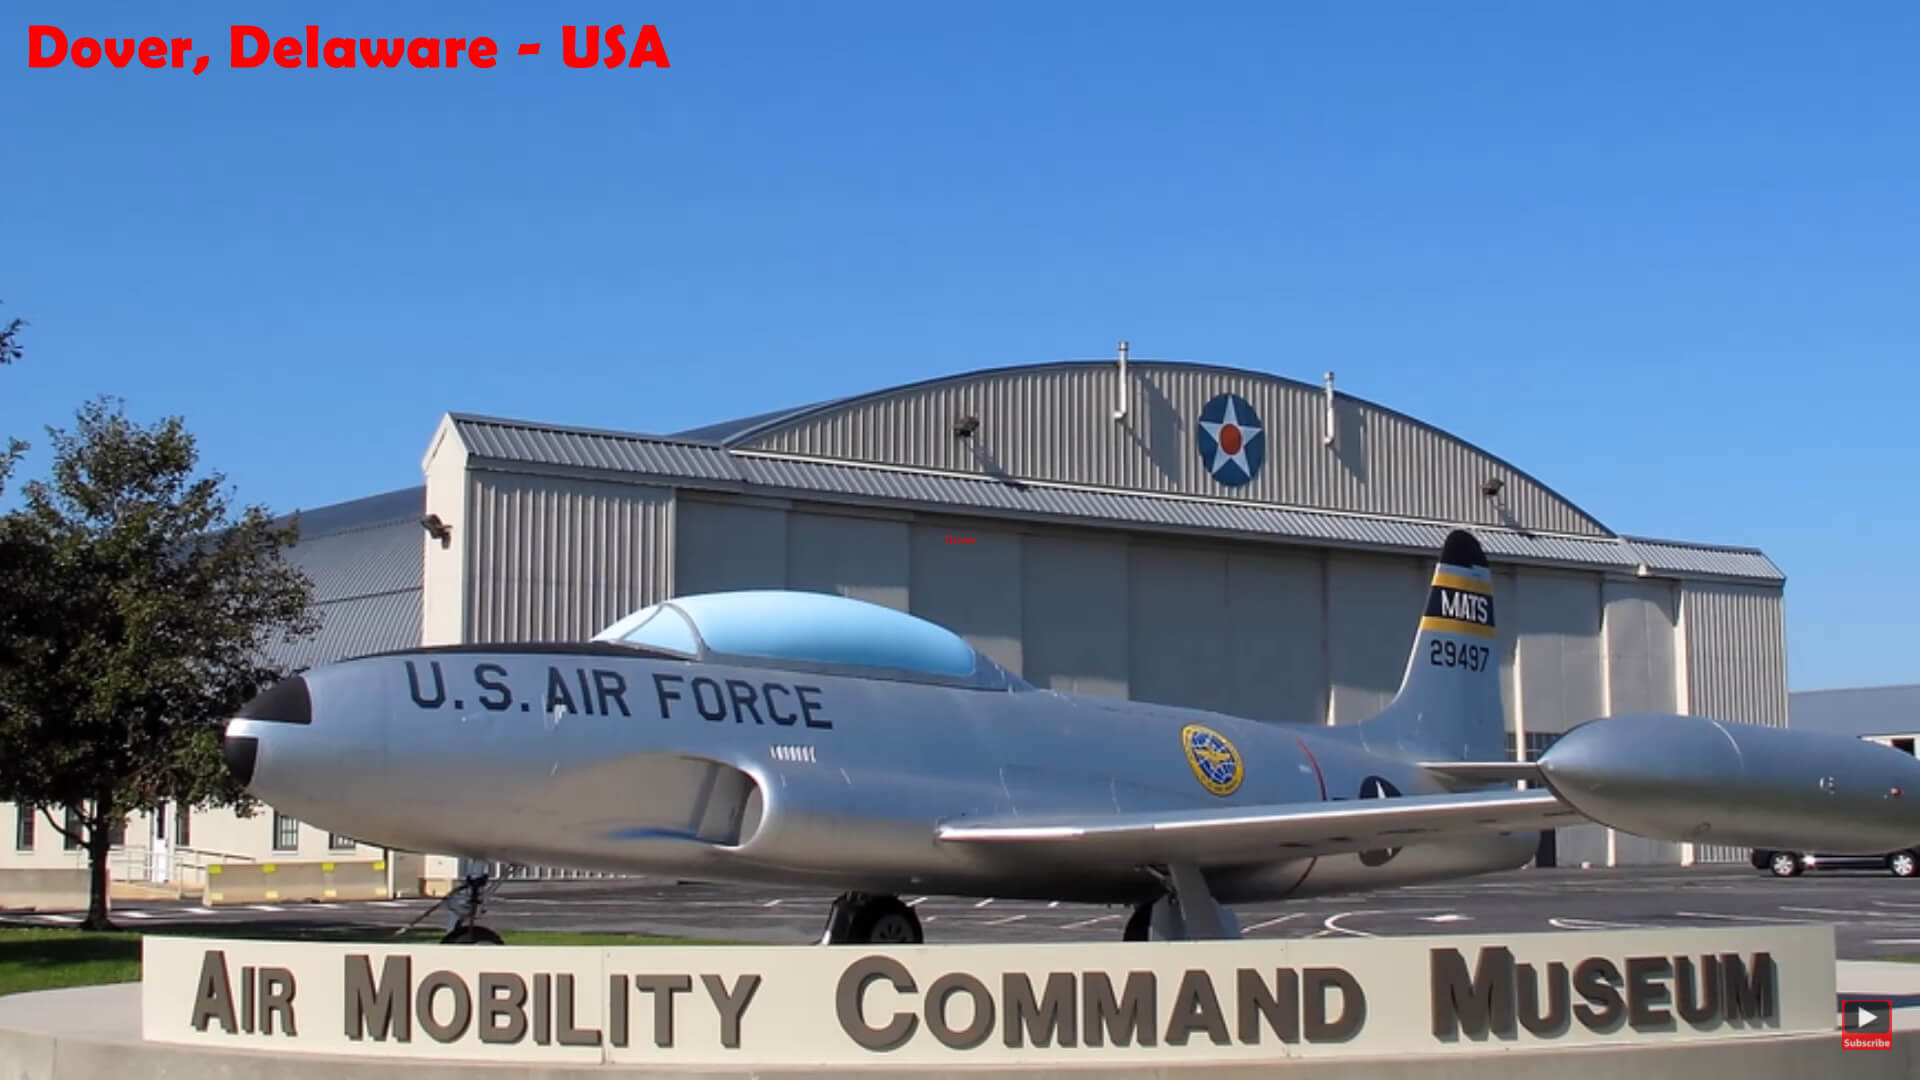 Air Mobility Command Museum Dover Delaware US